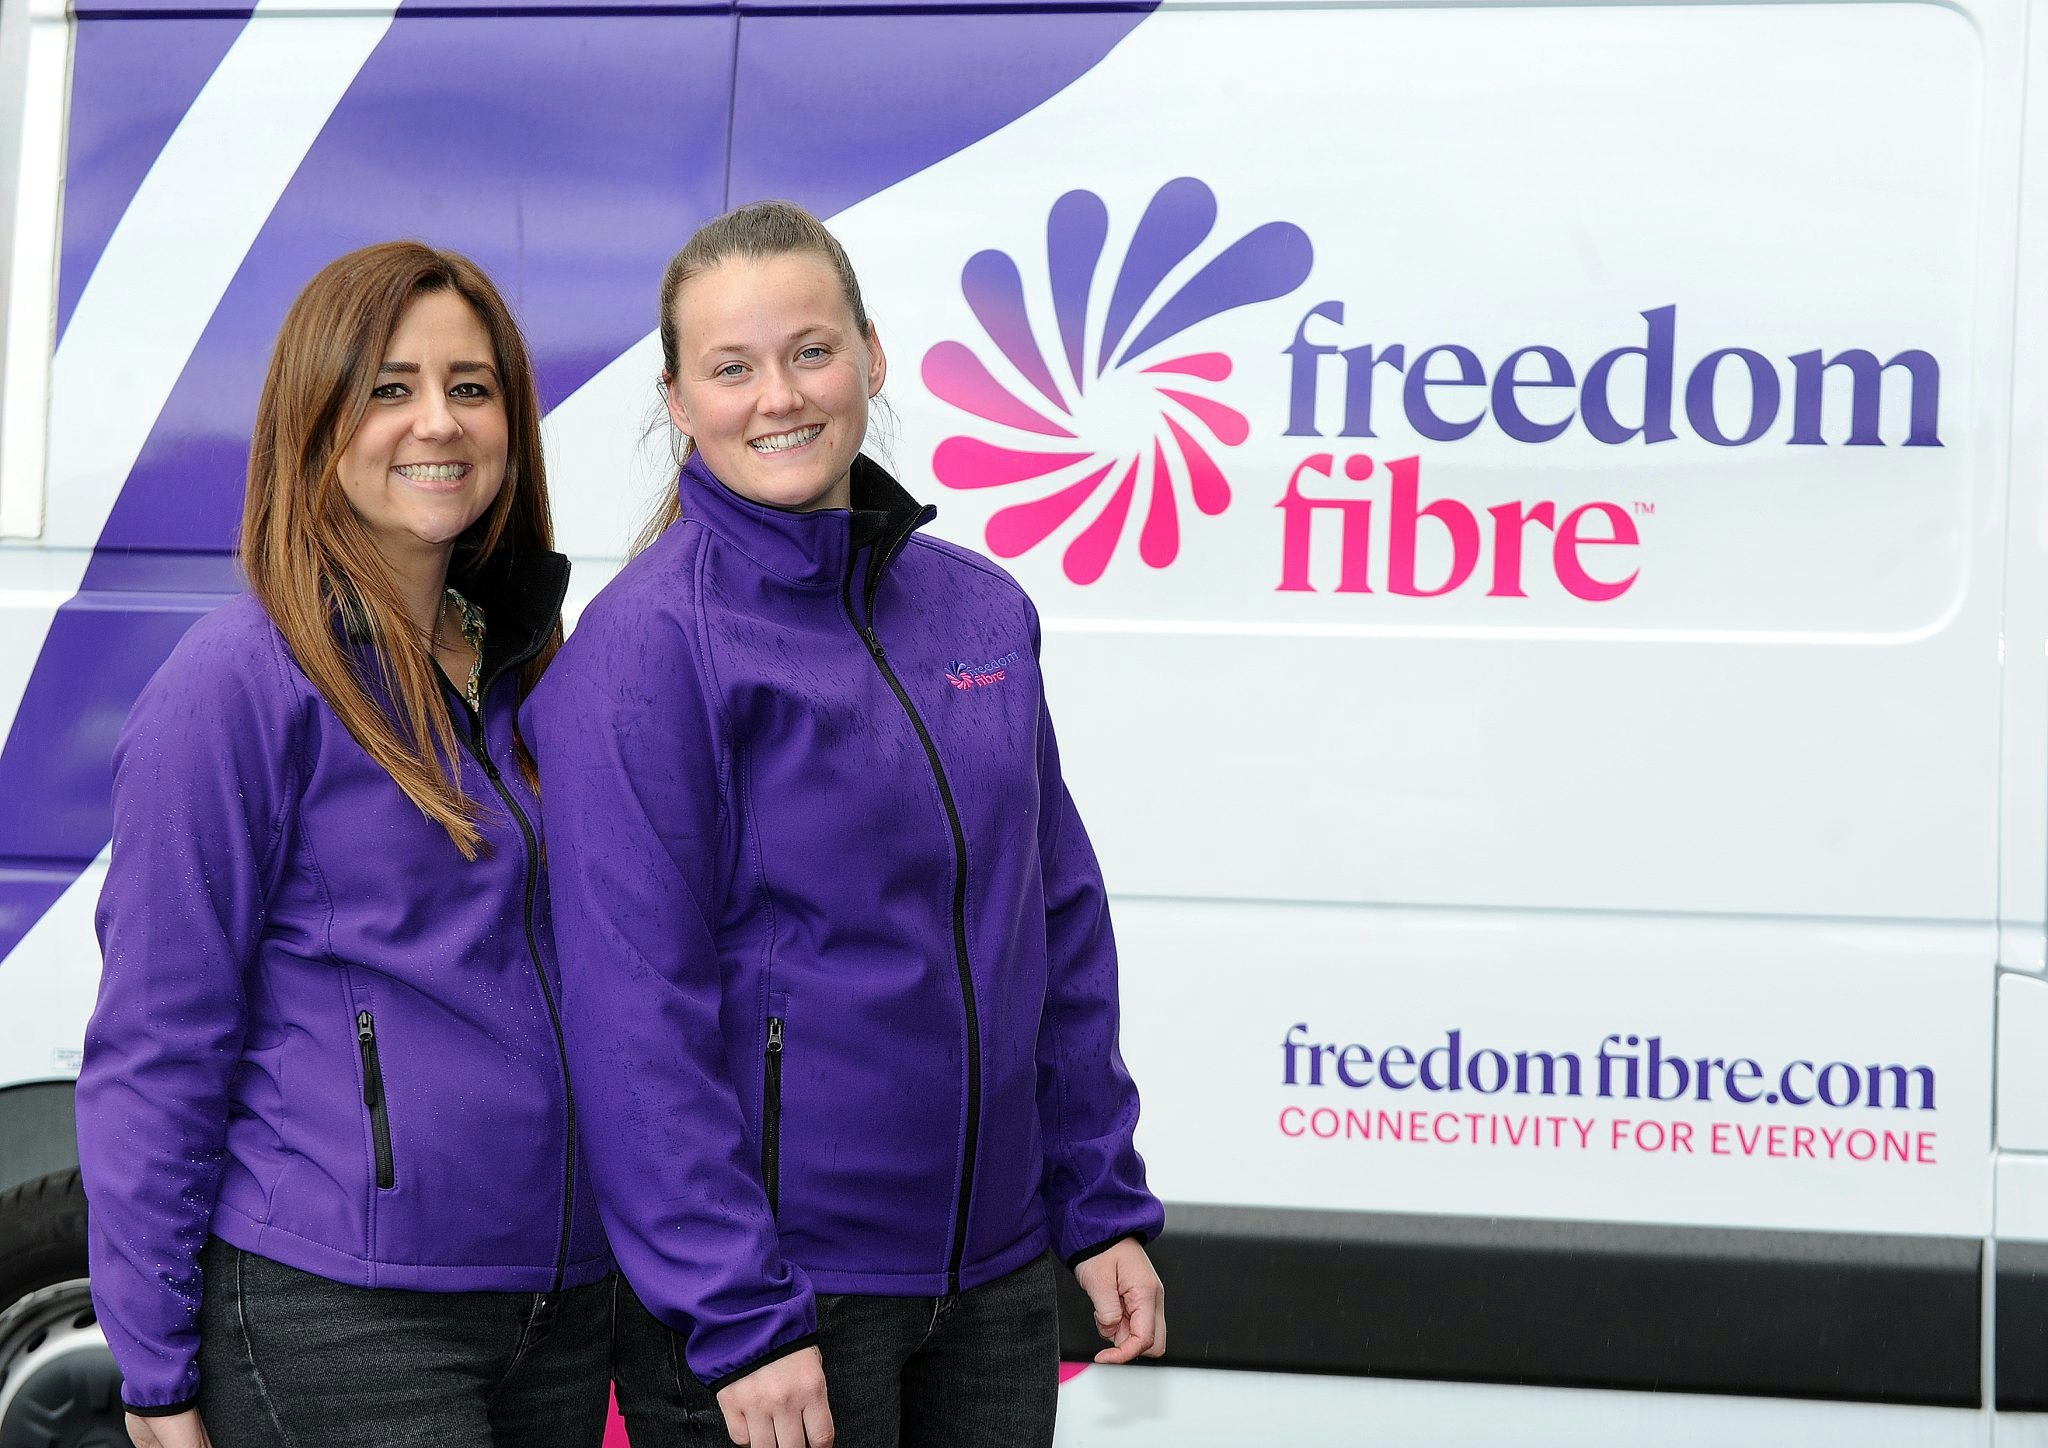 Lucy and Alex from the build team at Freedom Fibre.